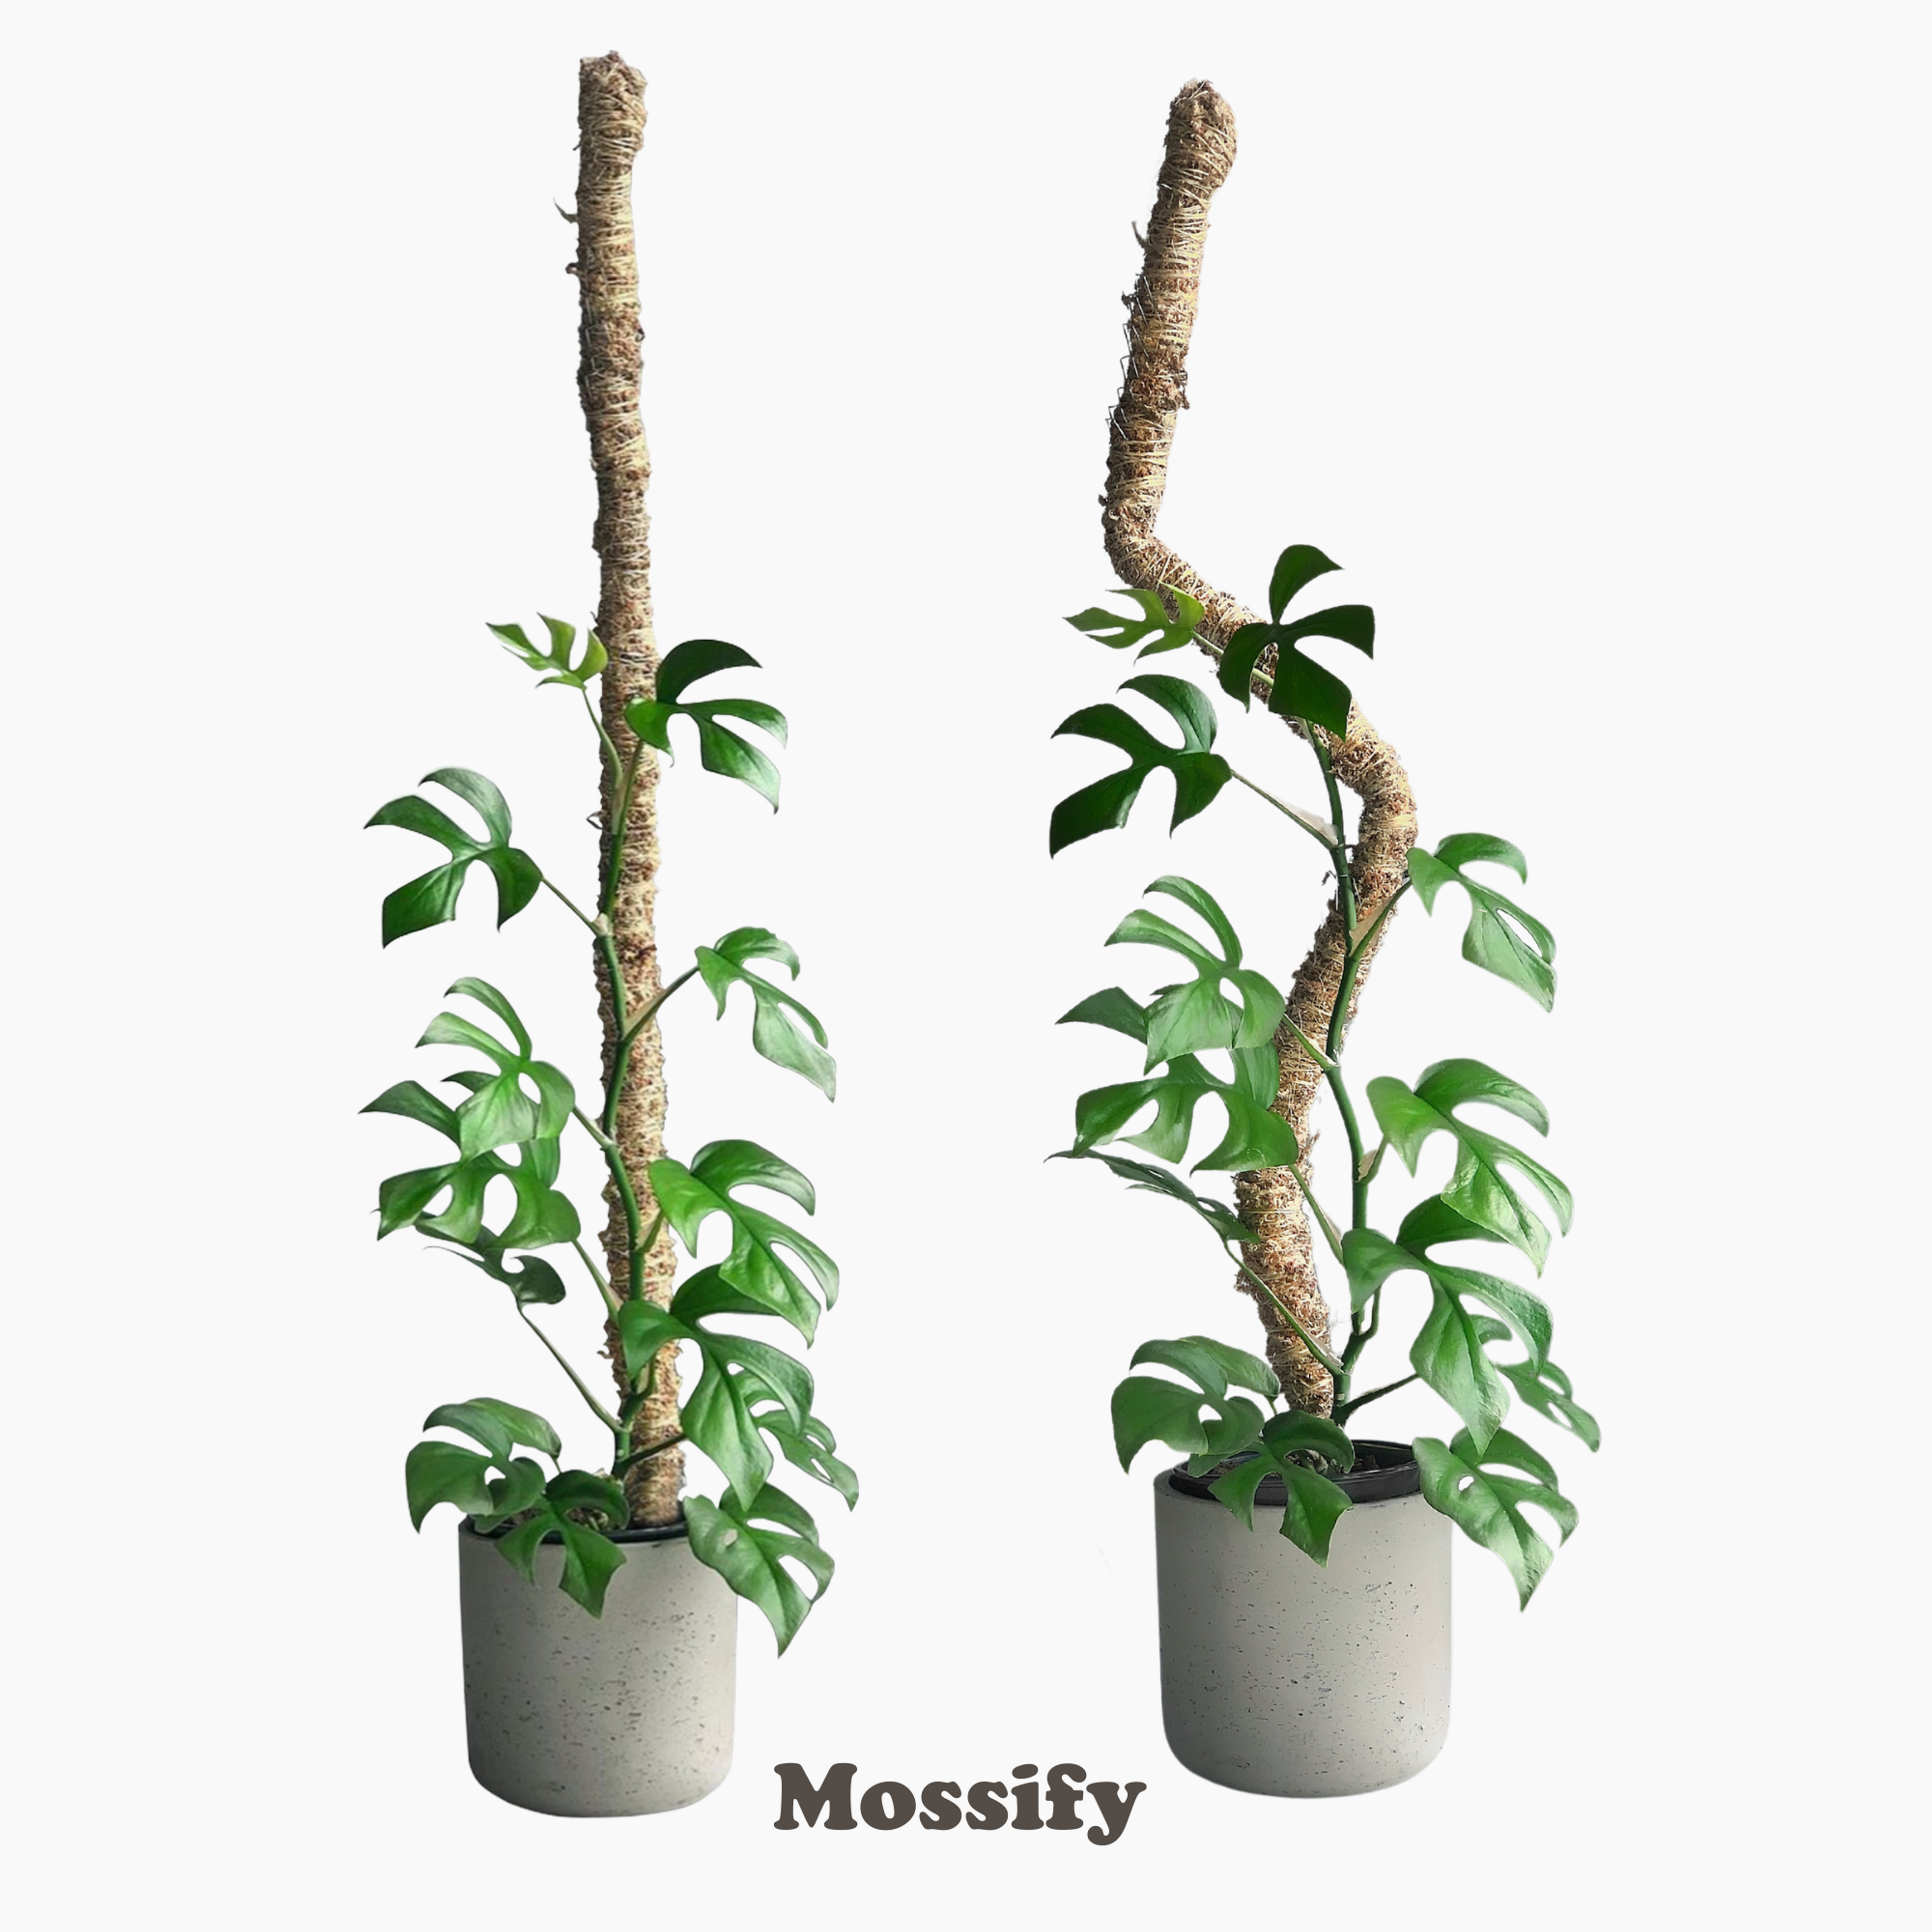 The Original Bendable Moss Pole - Best Seller (Pins Included)